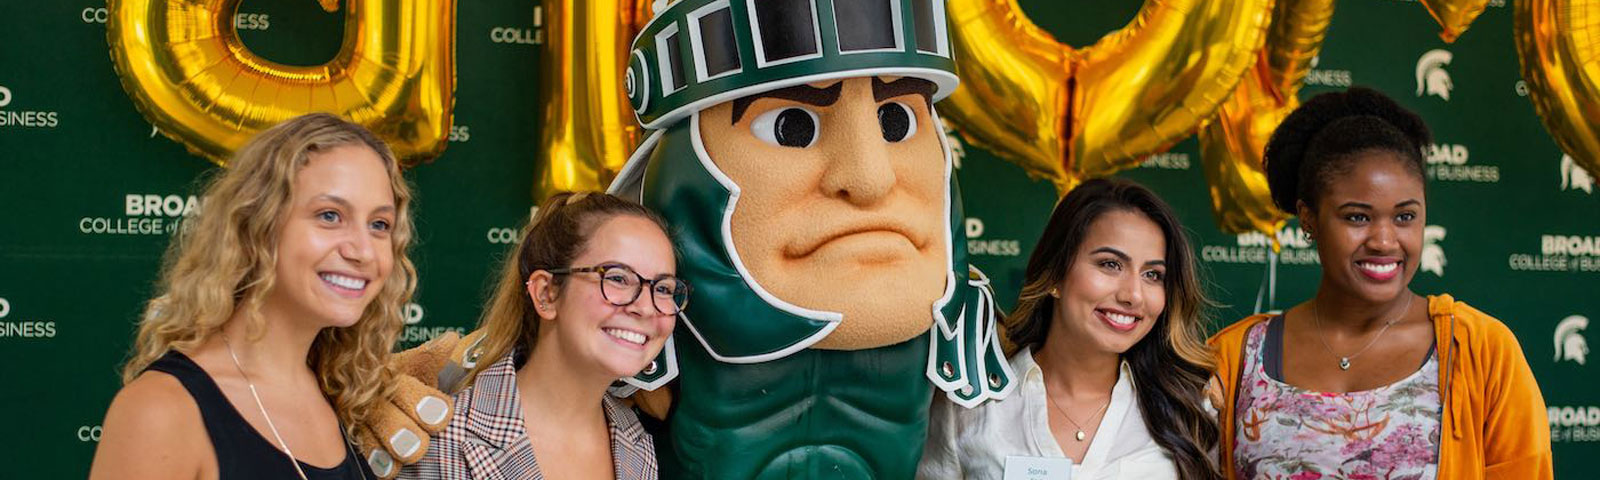 Broad College of Business undergraduate students posing with Sparty for a group photo